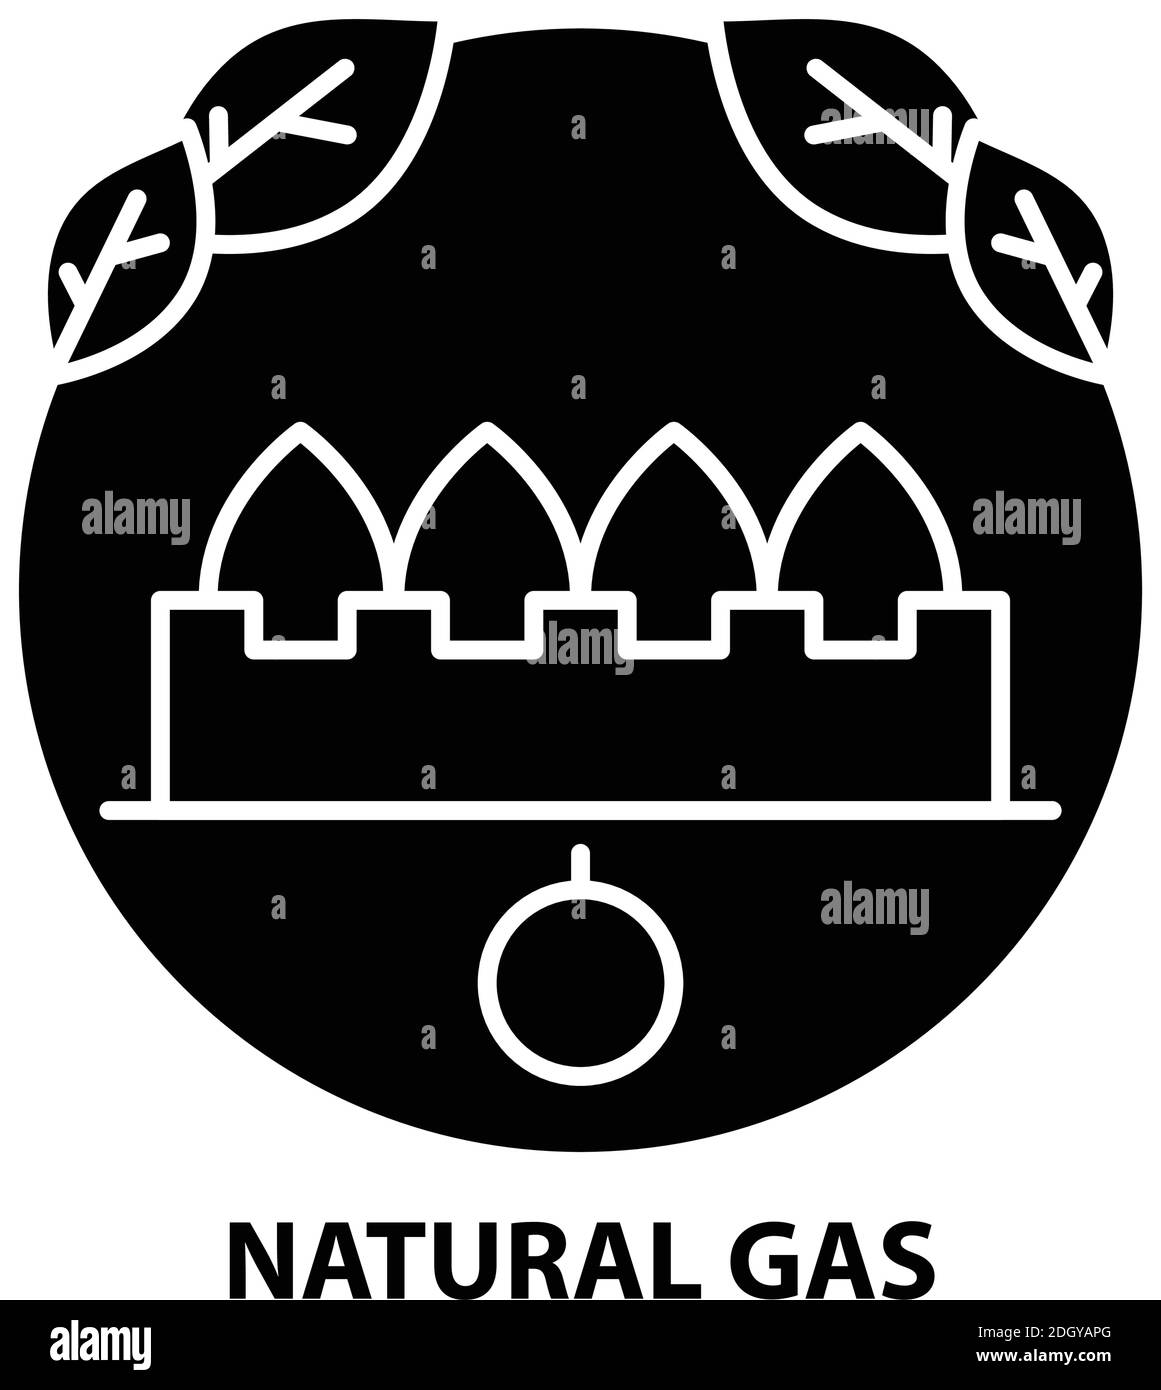 natural gas symbol icon, black vector sign with editable strokes, concept illustration Stock Vector